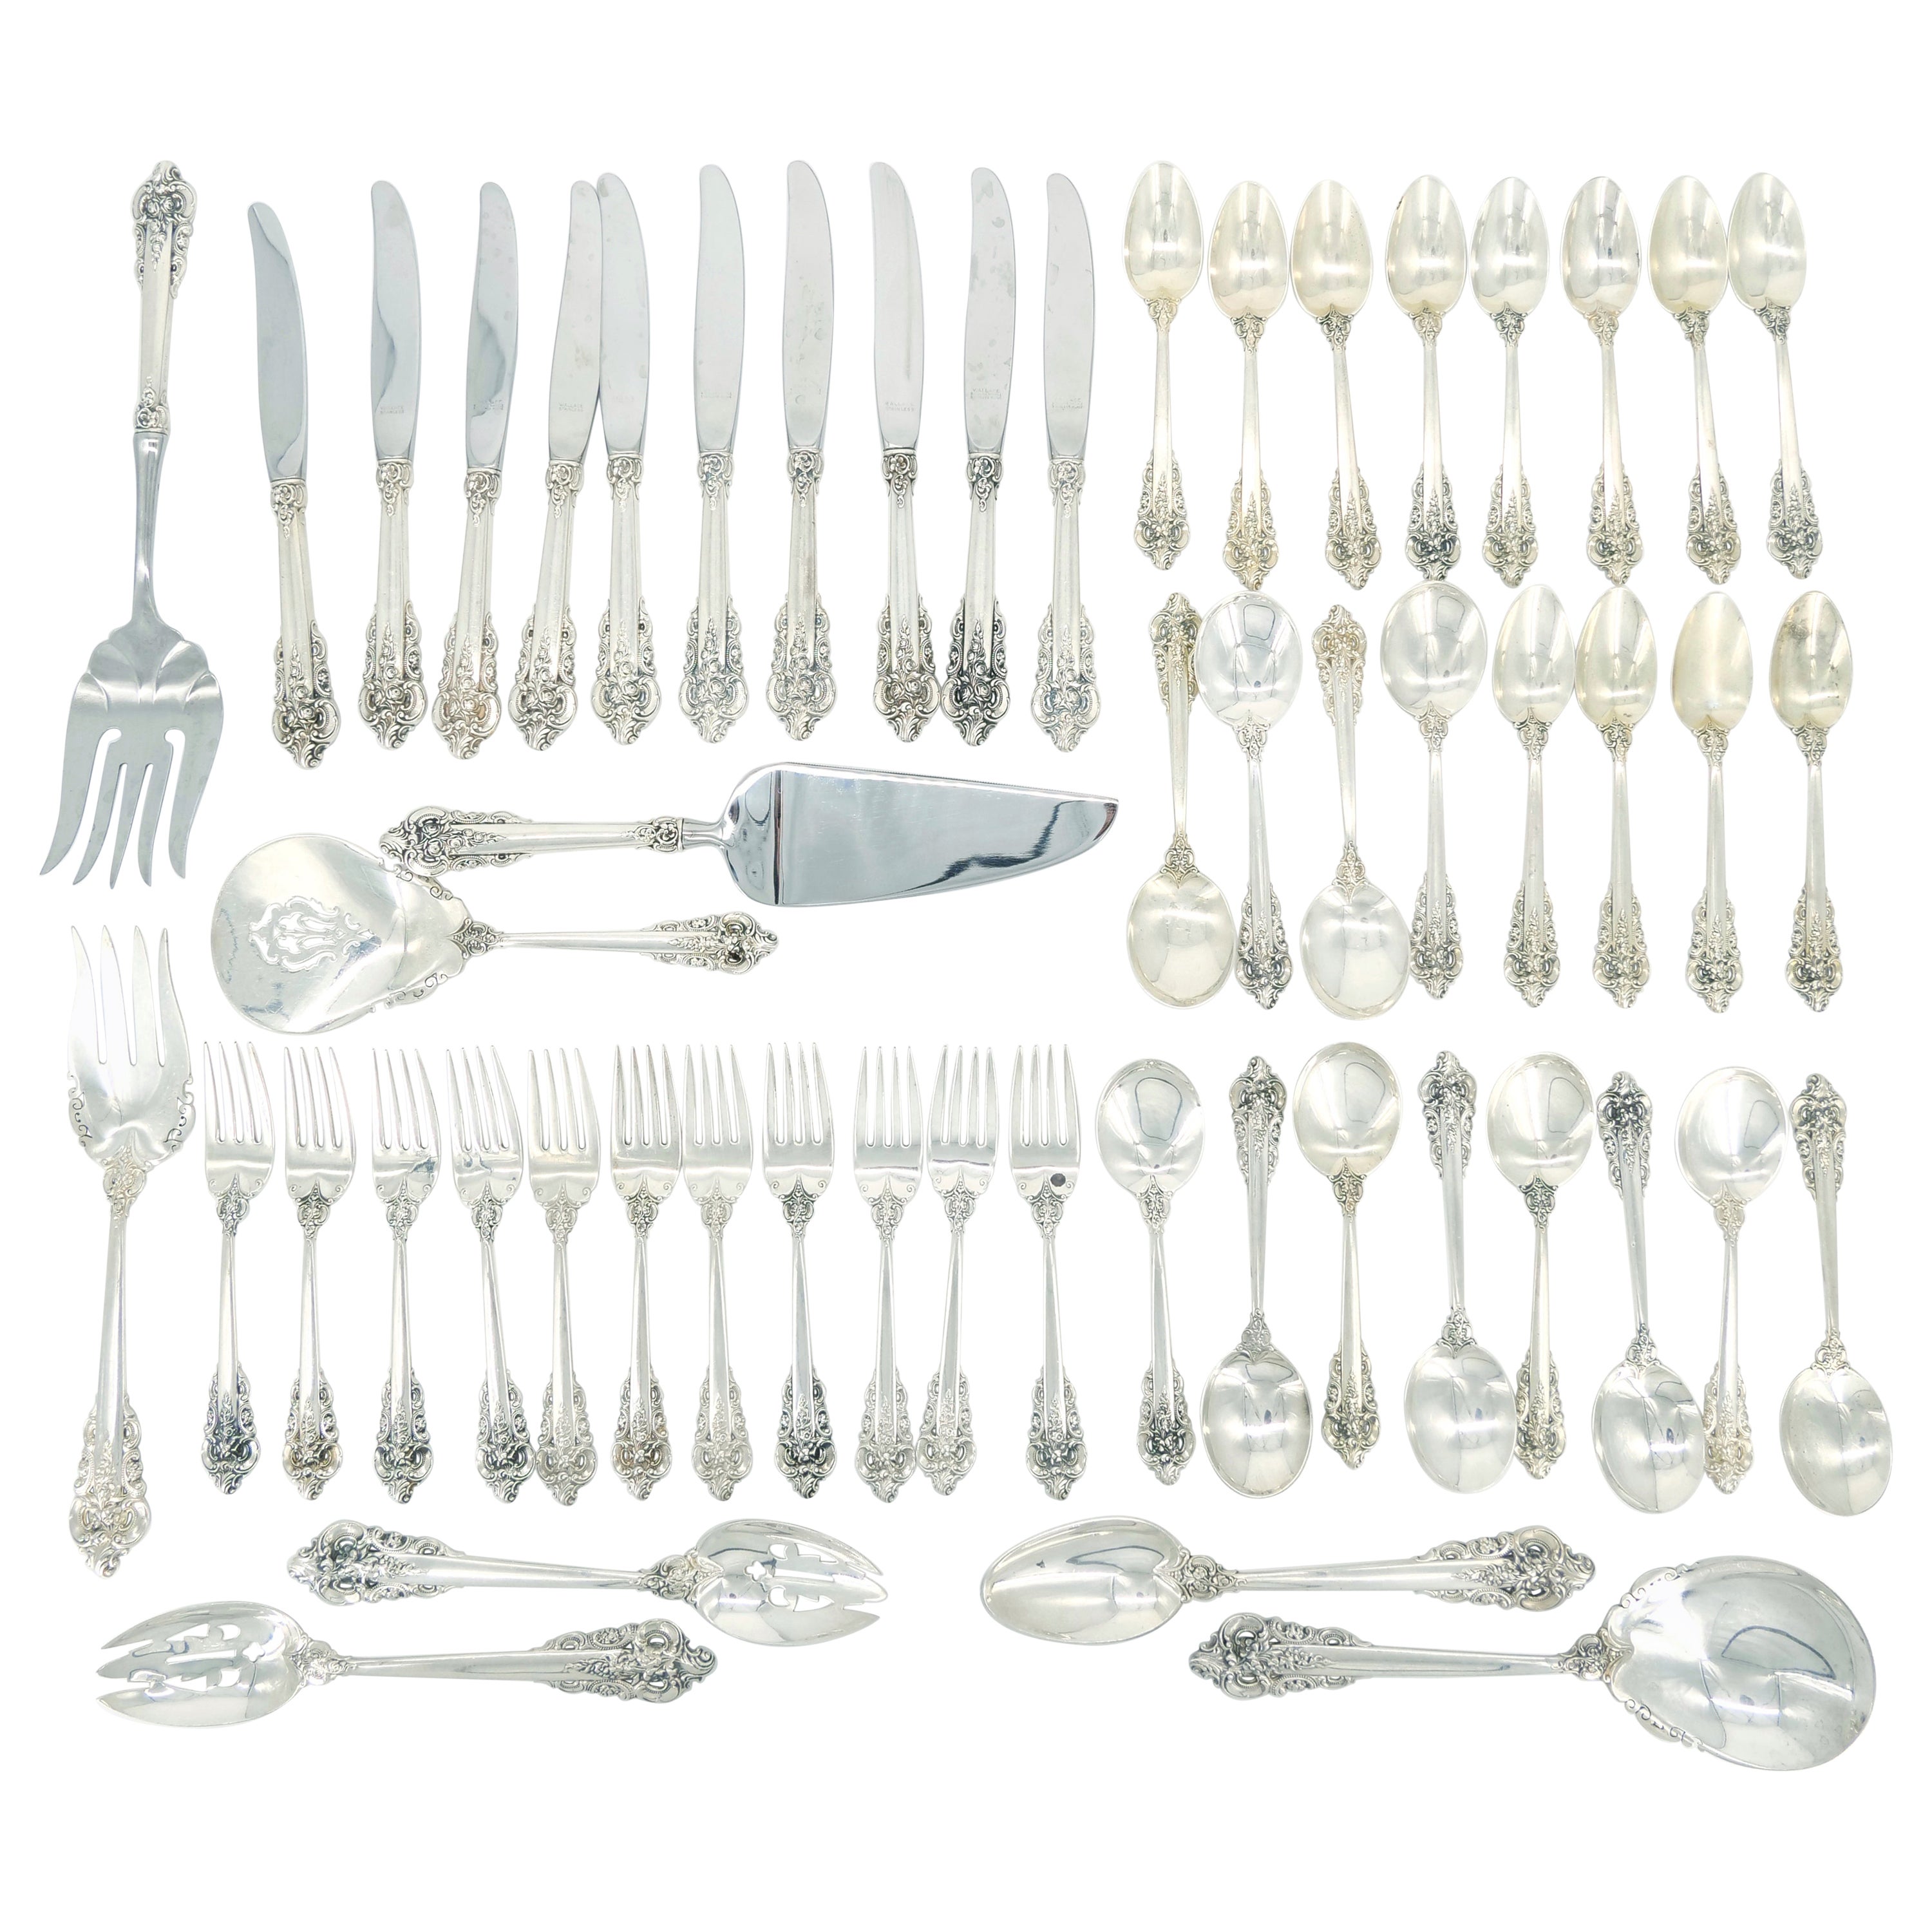 Early 20th Century Sterling Silver Flatware Service For 24 People For Sale